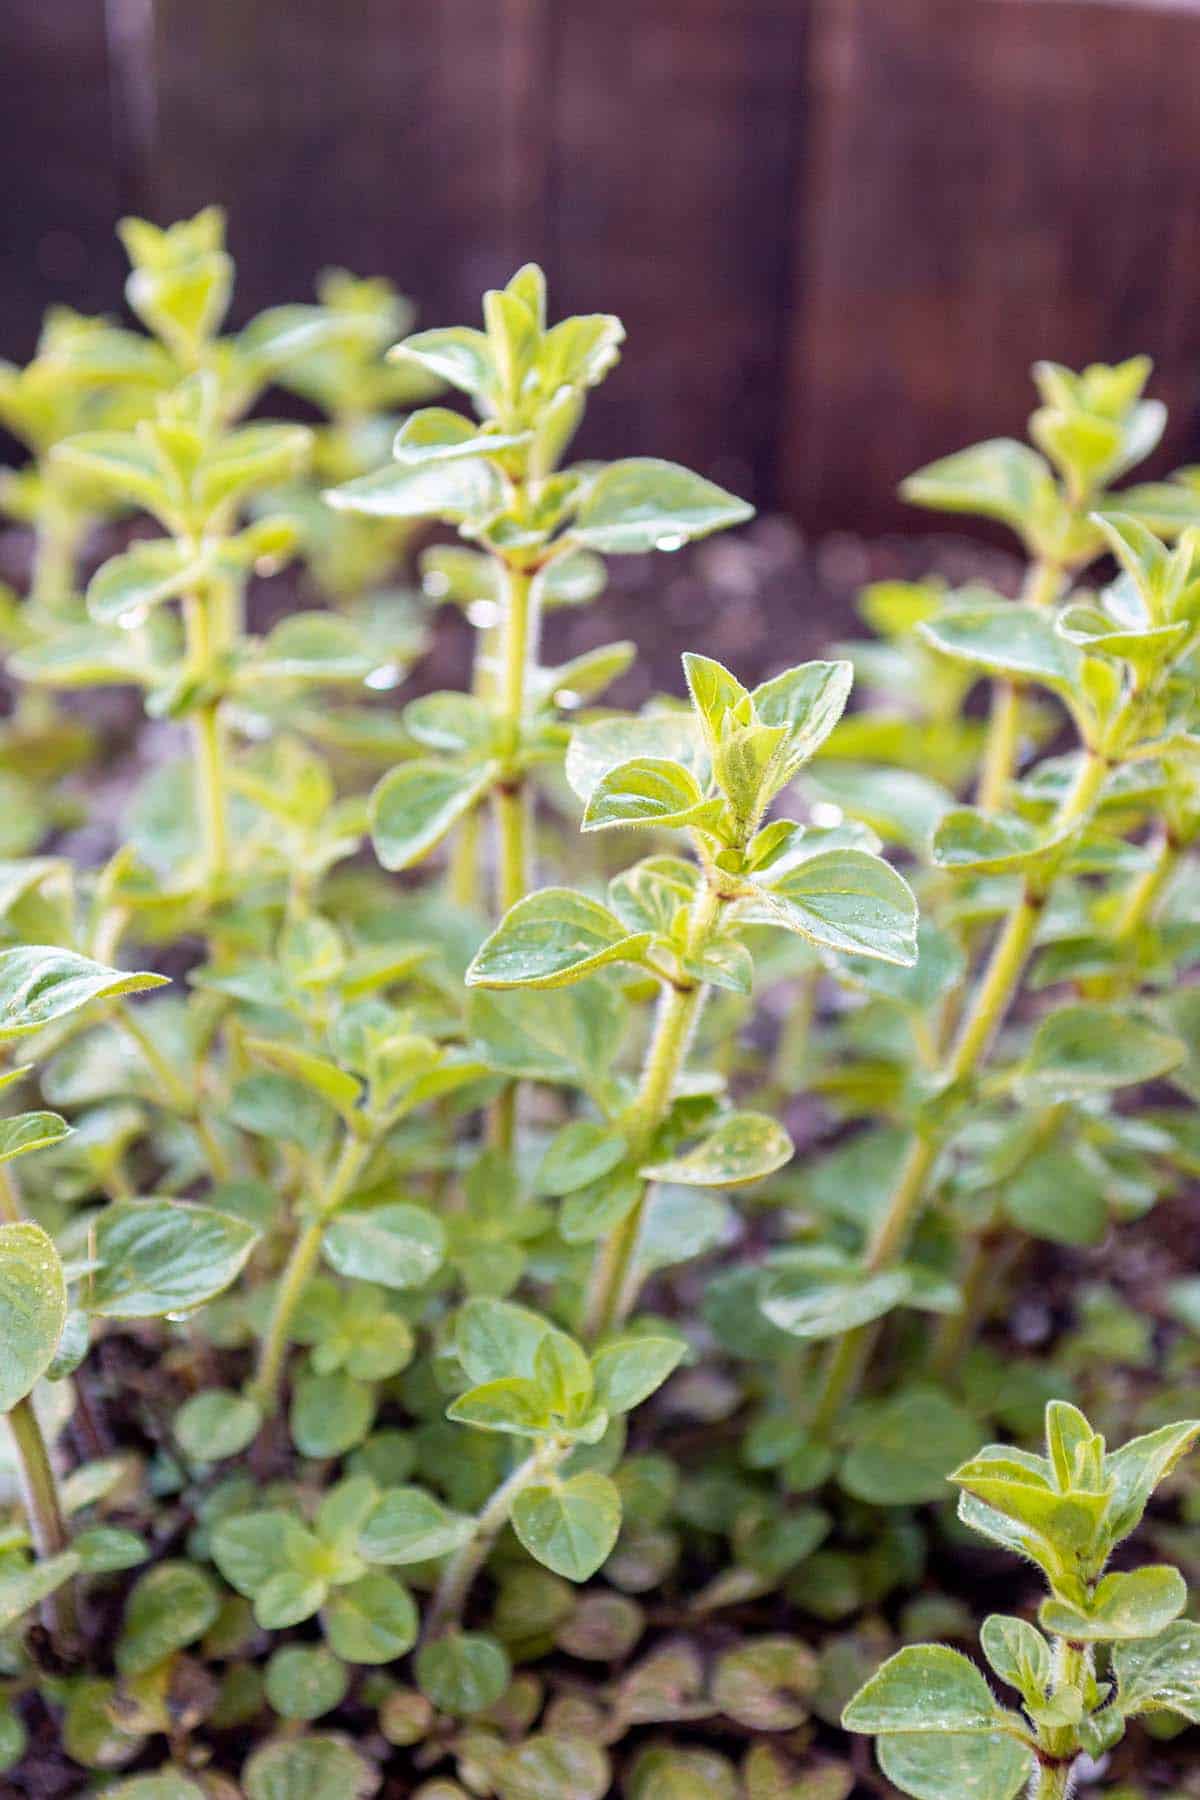 An oregano plant growing in a container.